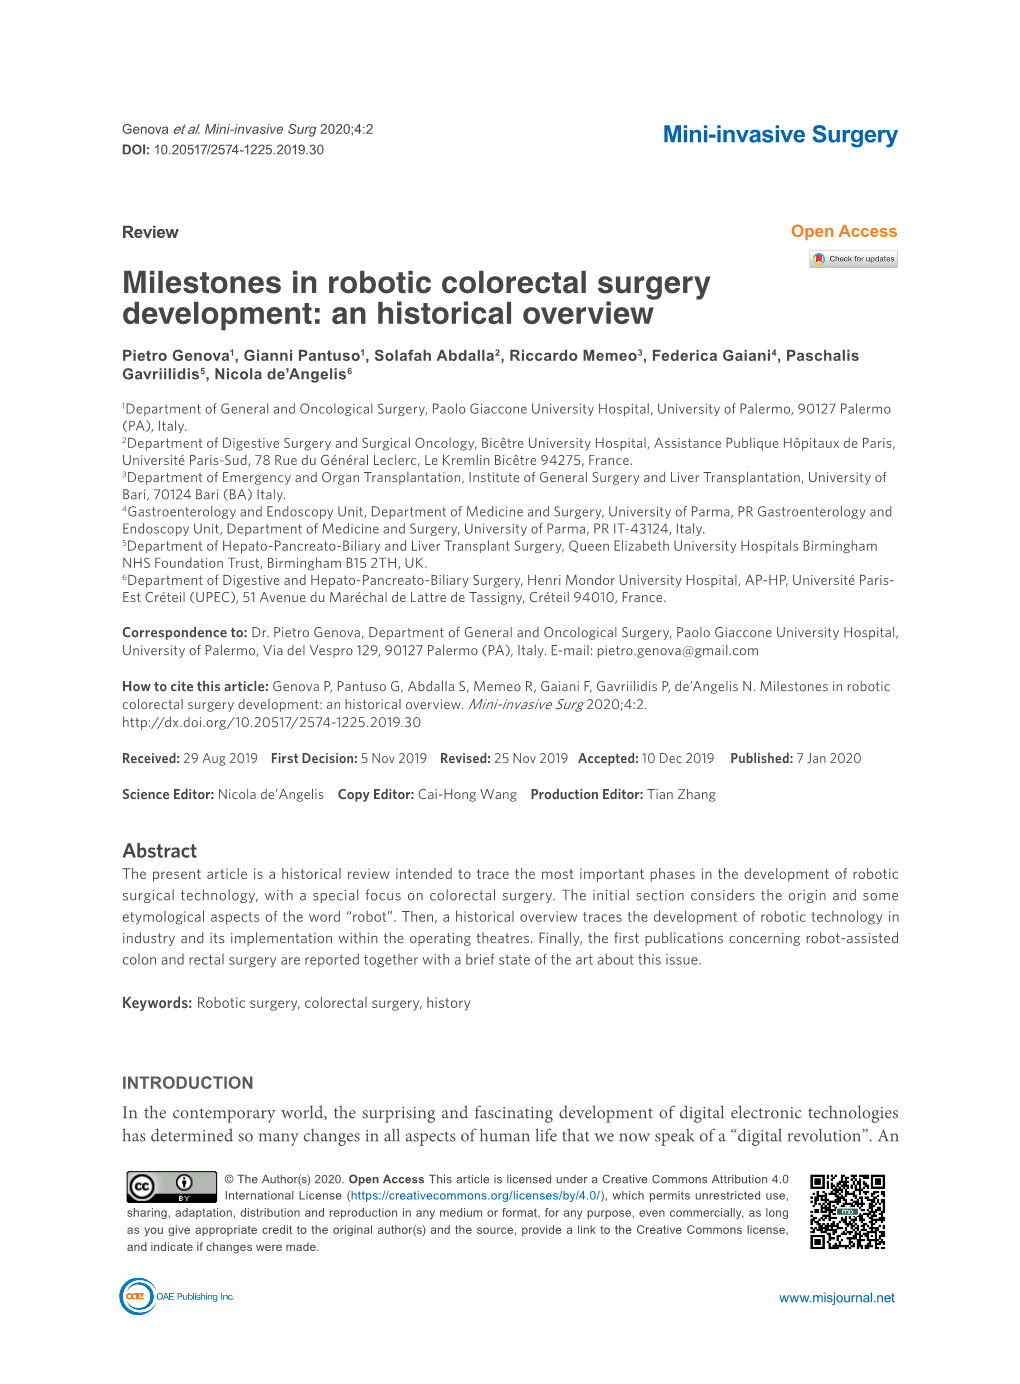 Milestones in Robotic Colorectal Surgery Development: an Historical Overview